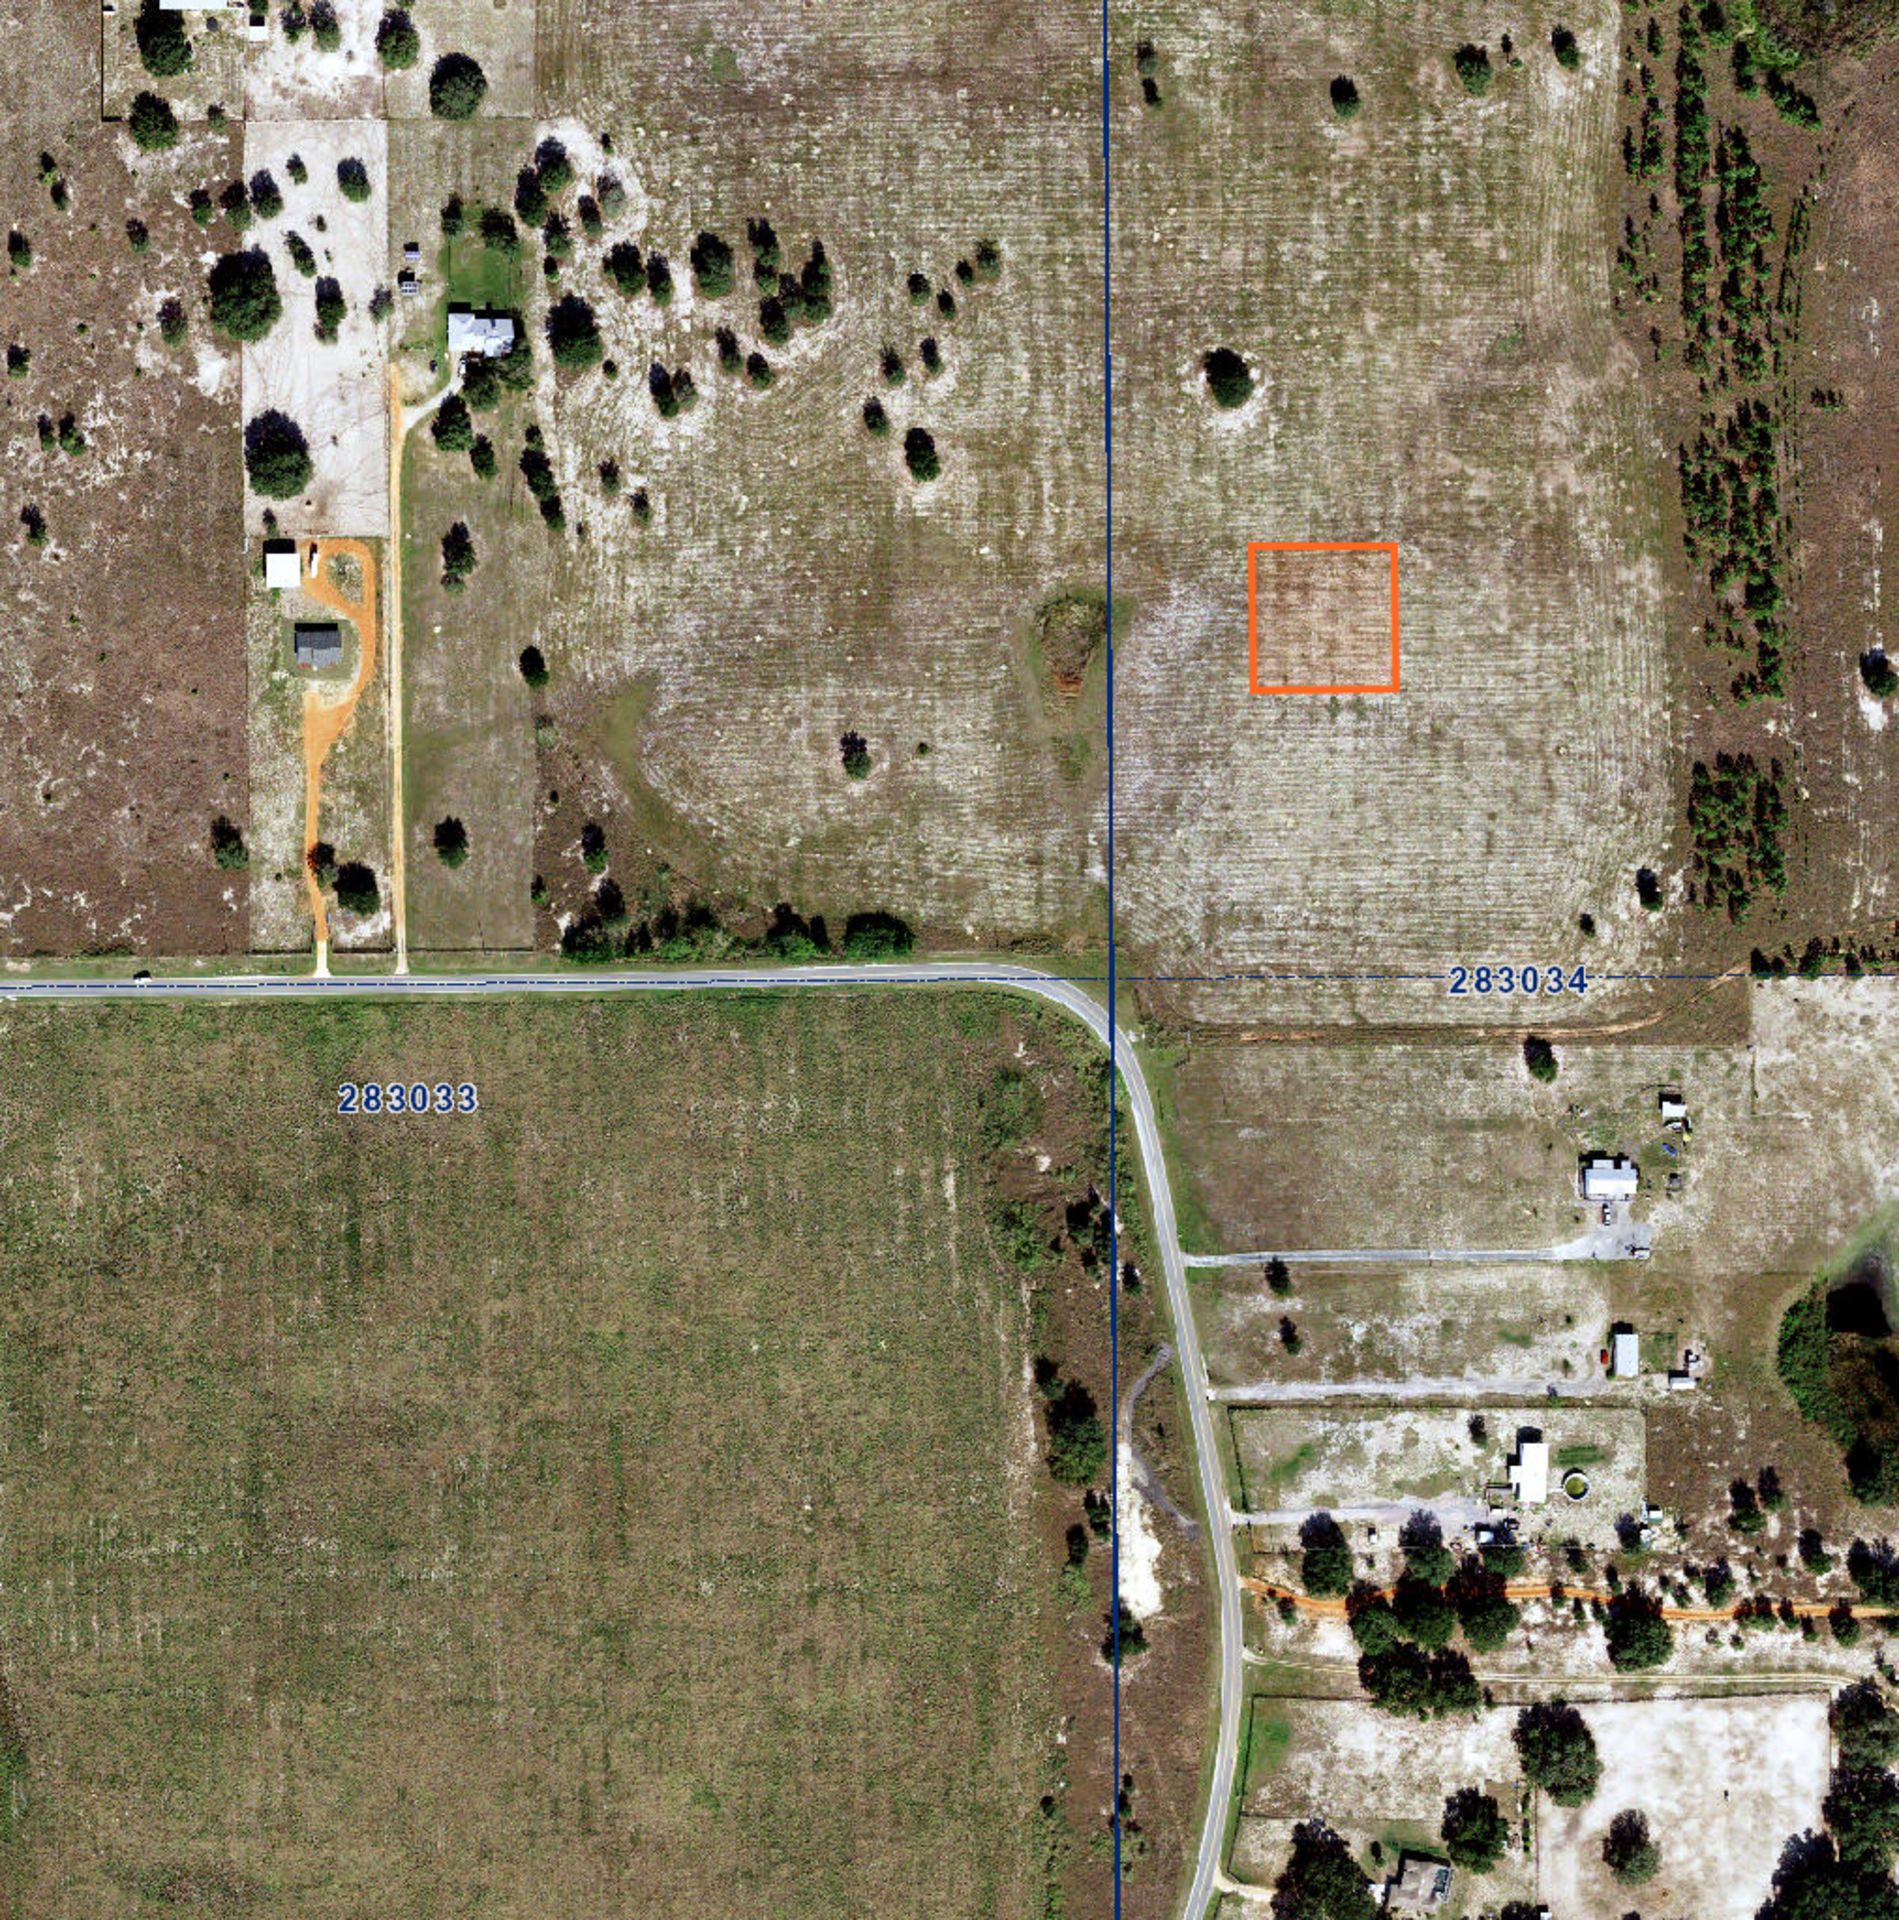 Over Half Acre in Peaceful, Polk County, Florida! - Image 3 of 8